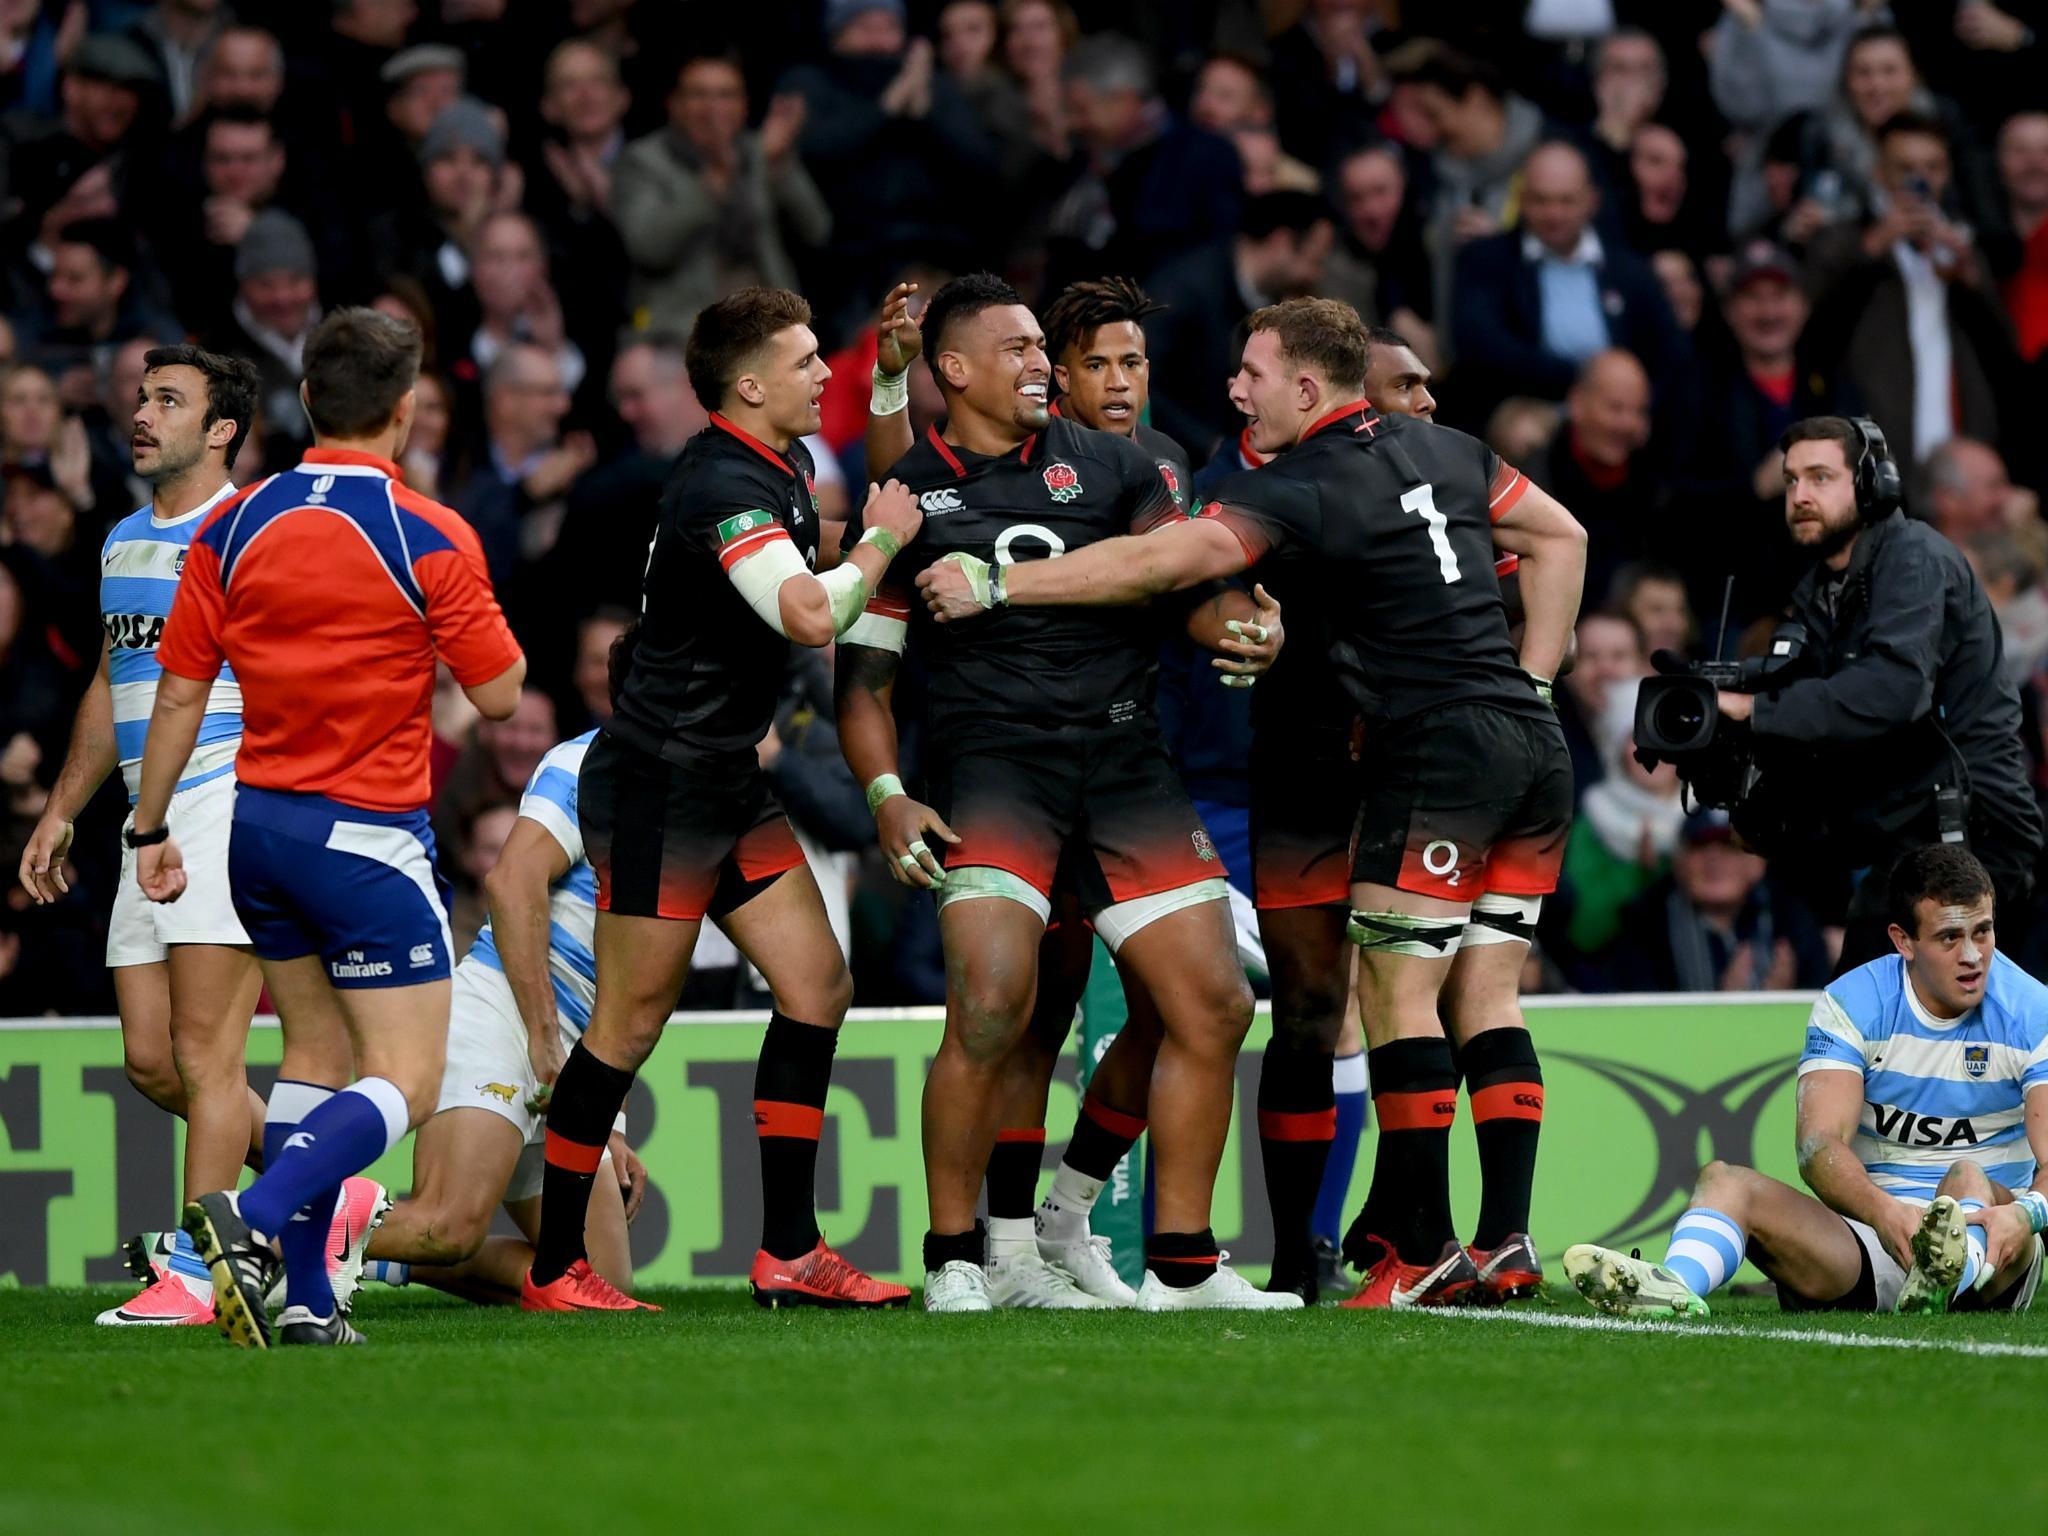 England celebrate after Nathan Hughes scores a try against Argentina